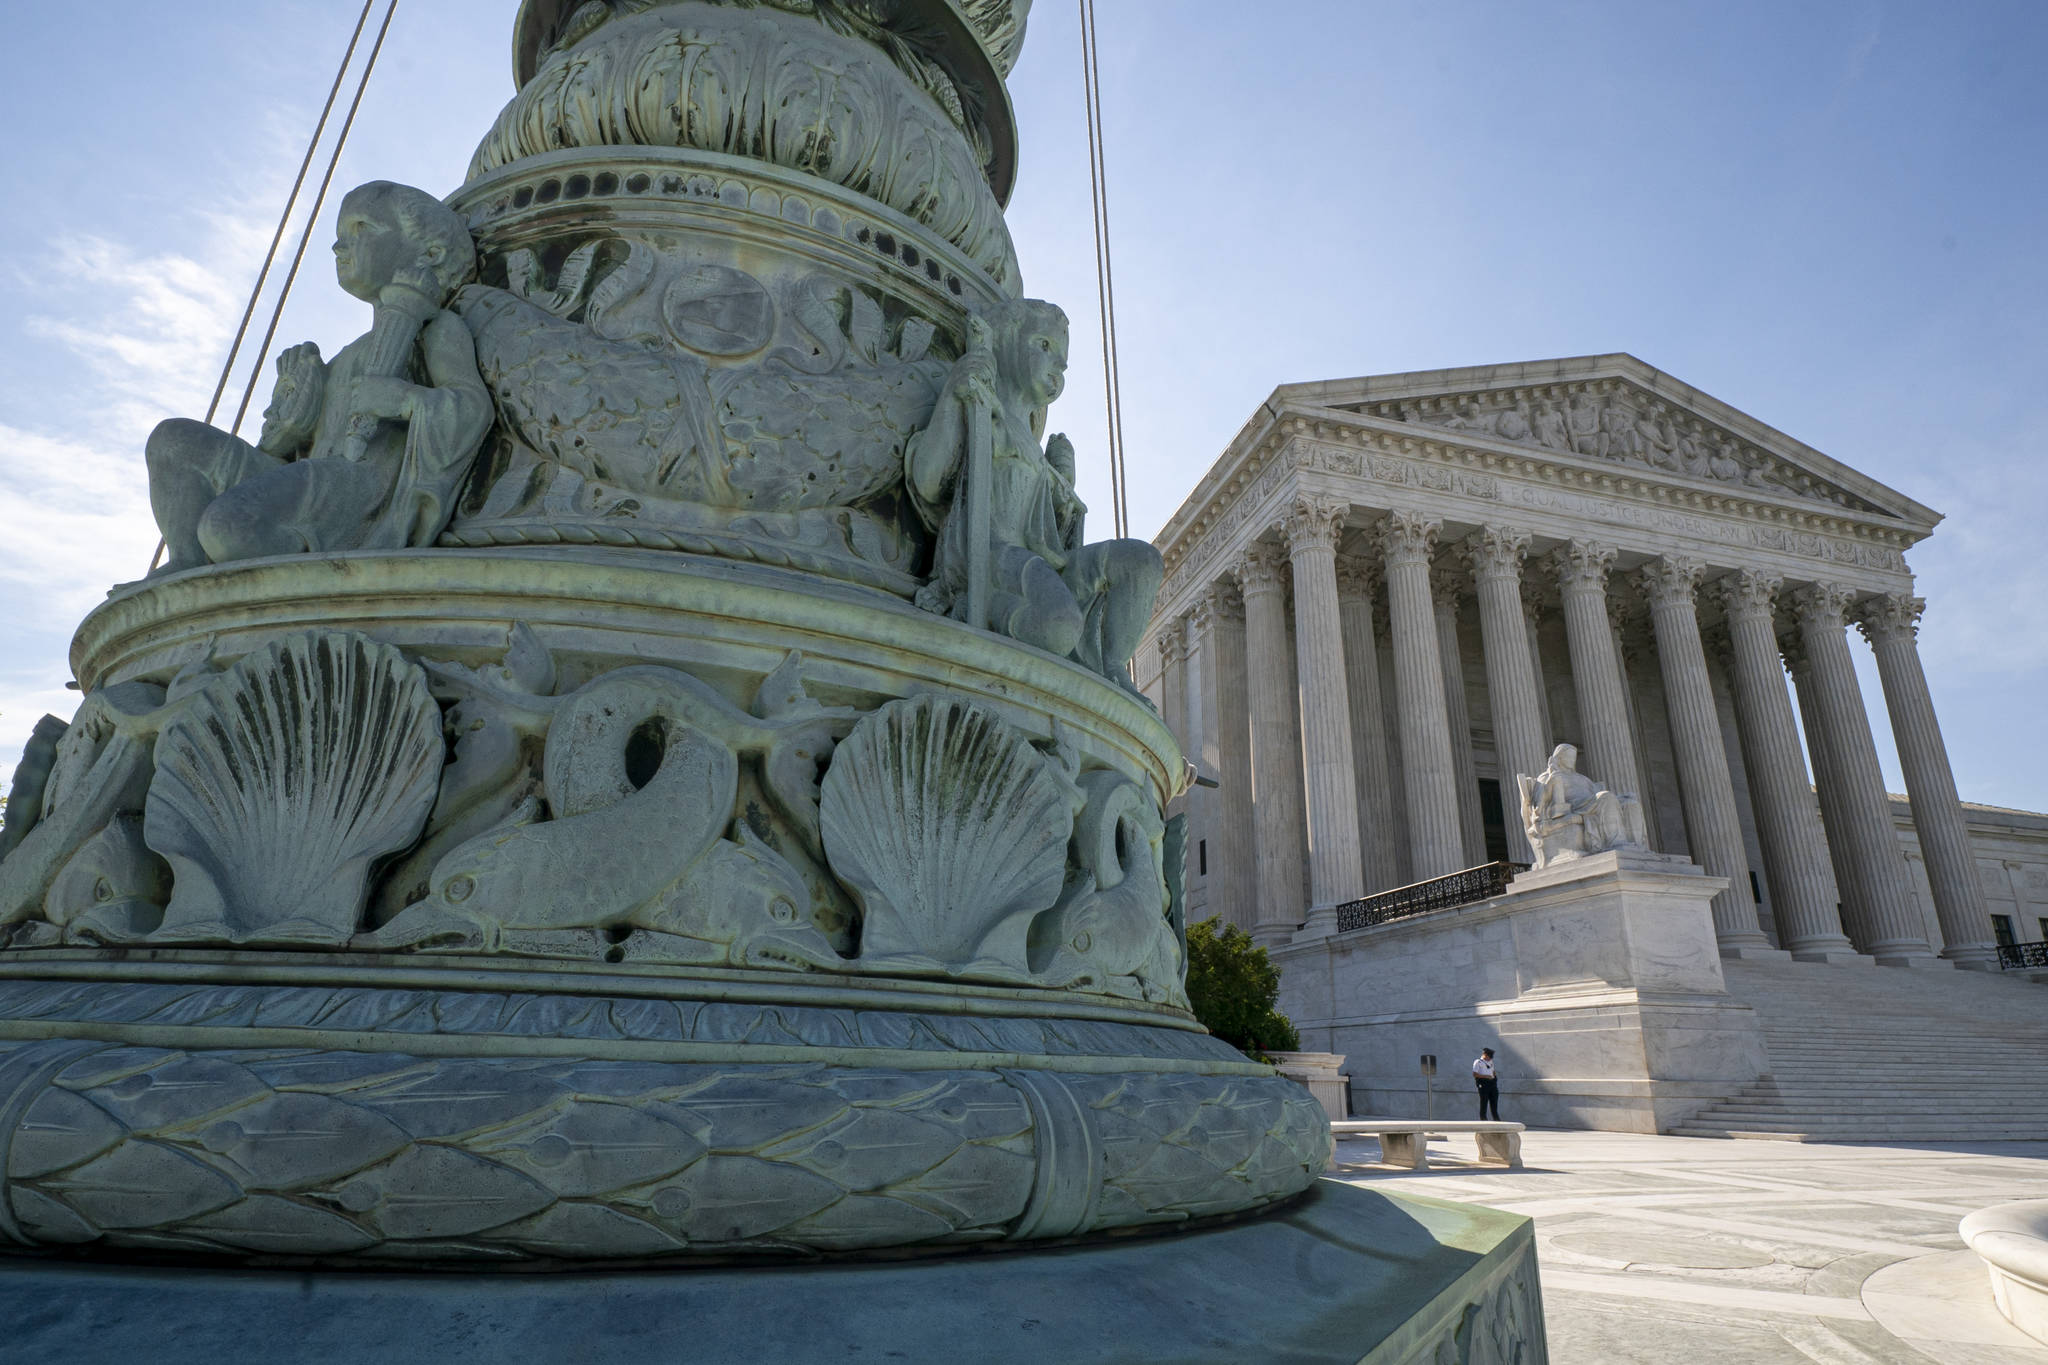 In this June 17, 2019 file photo, The Supreme Court is seen in Washington. (AP Photo | J. Scott Applewhite)